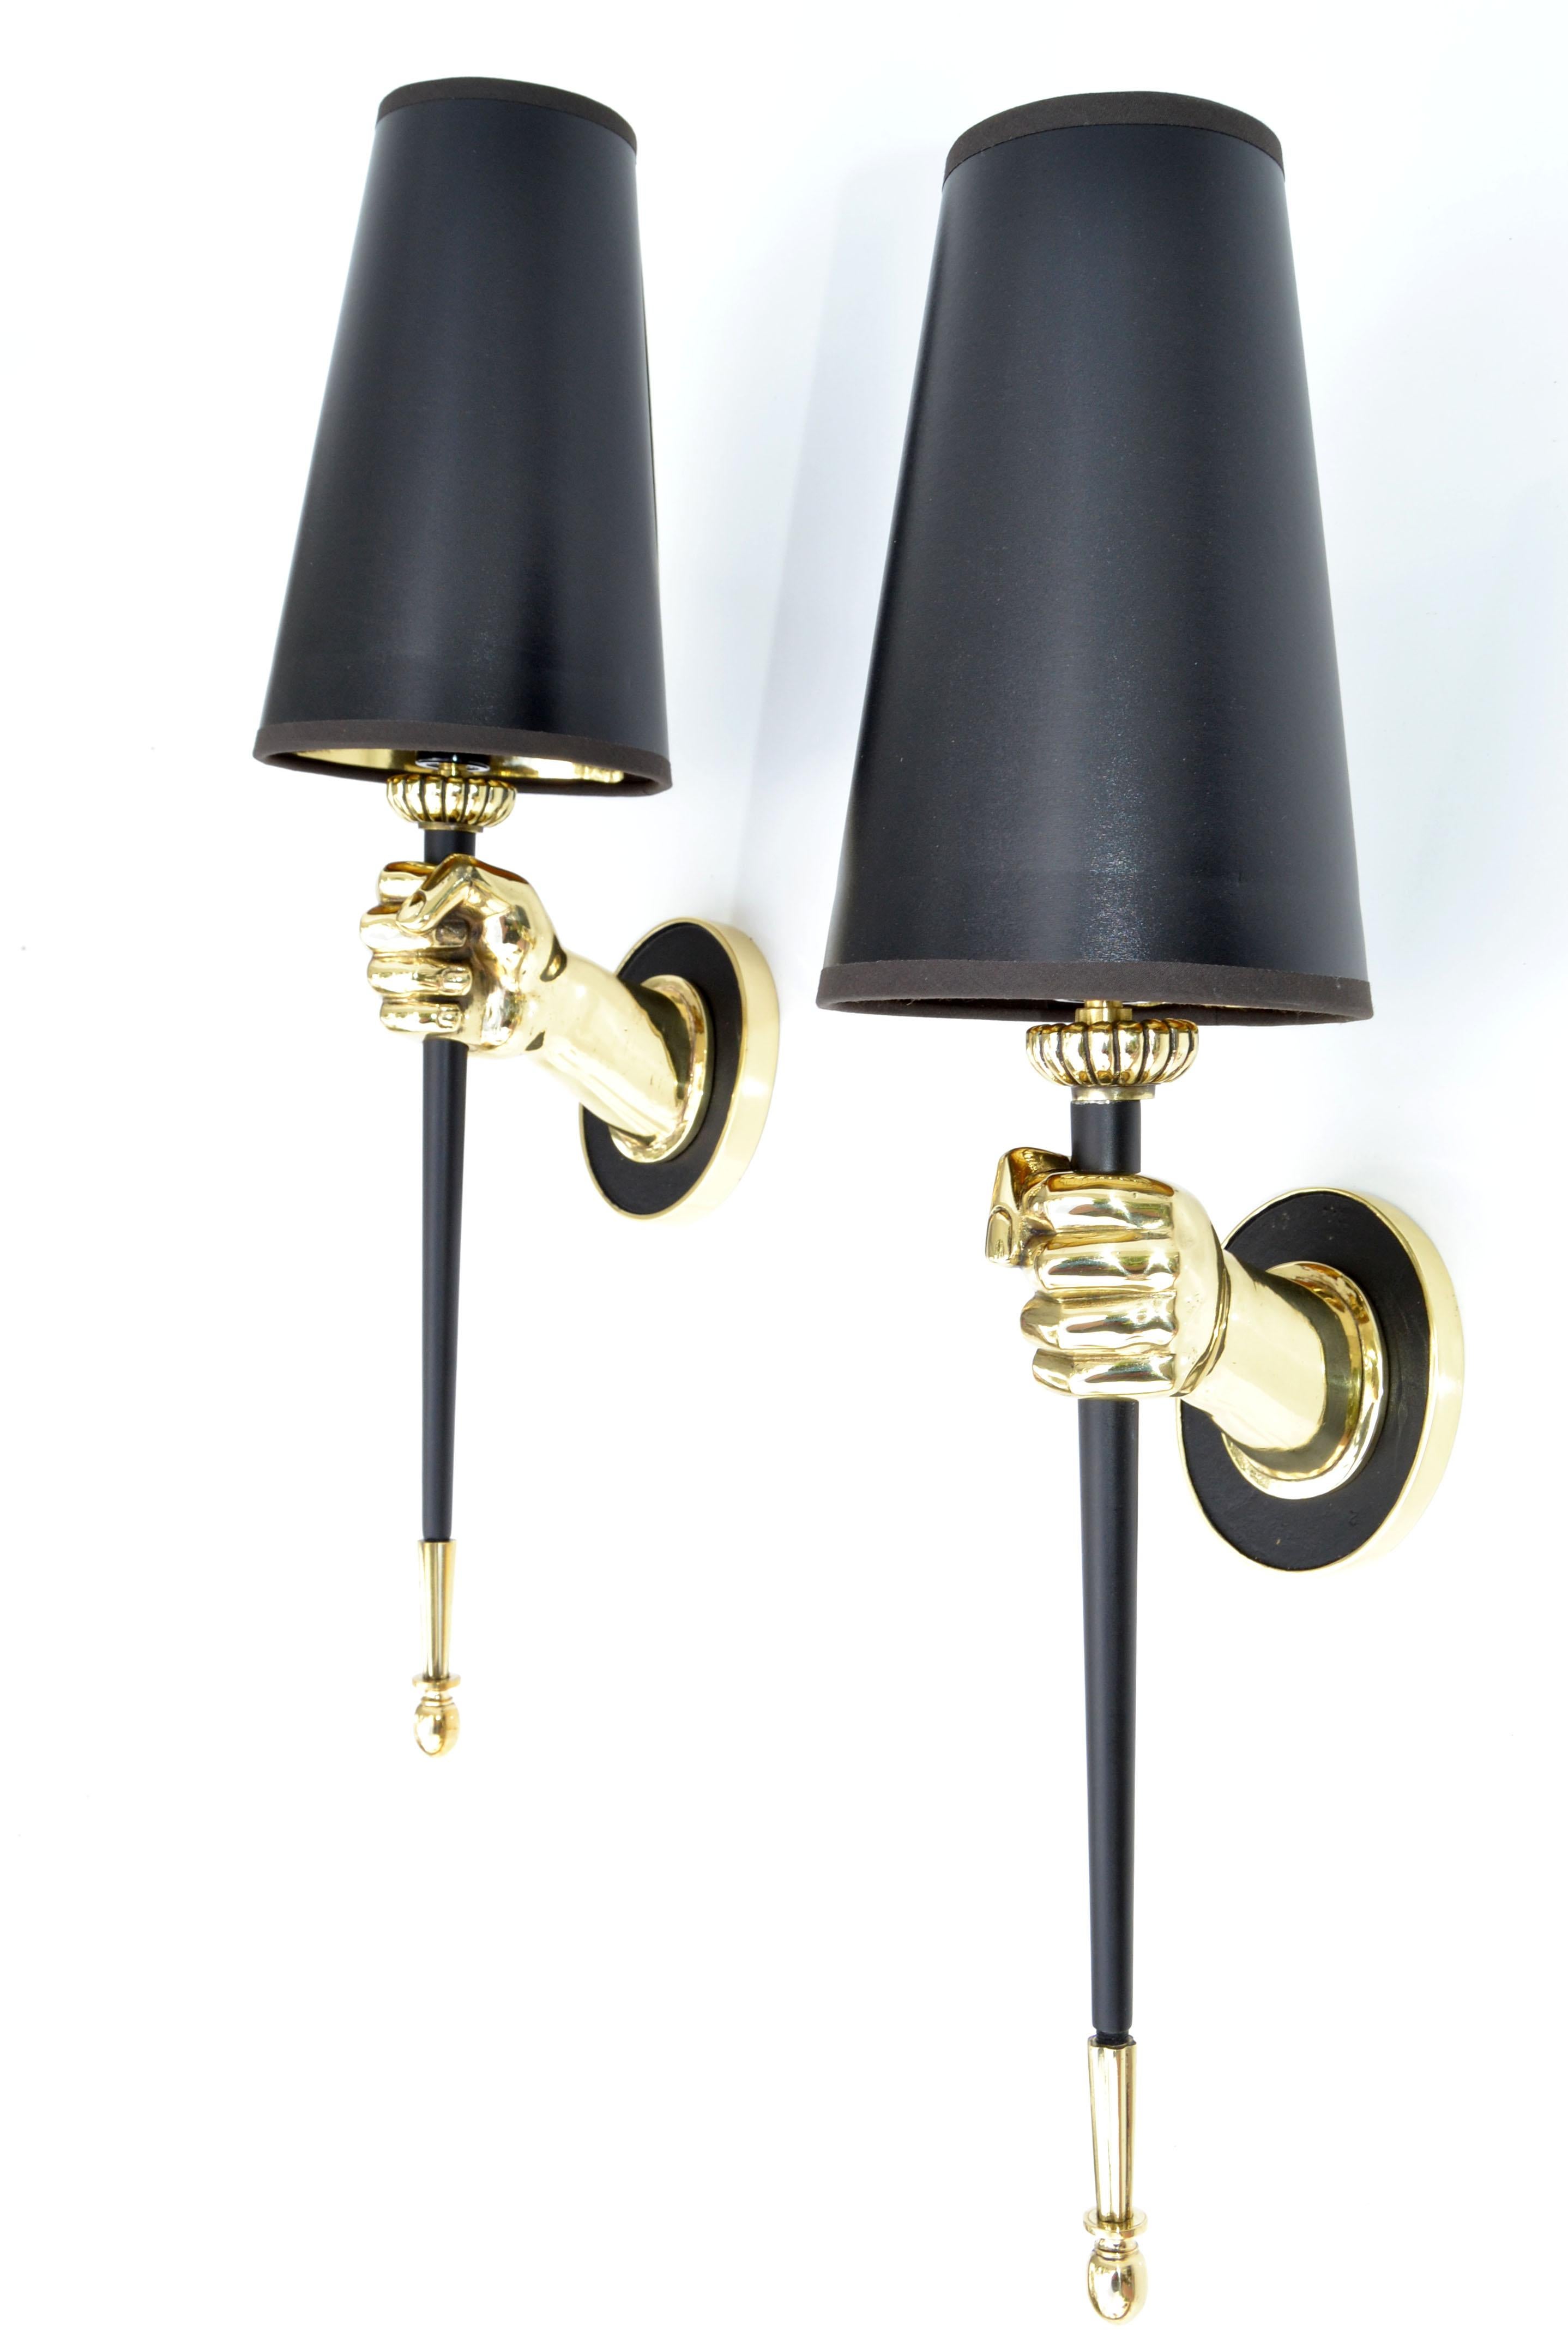 Impressive pair of sconces by Maison Jansen figuring a bronze hand holding a black lacquered torch.
One light, 60 watts max. US rewired.
Dimension without shade: 14 inches height, 3 1/4 inches width, 6 inches depth.
Projection back plate 4.5 H, 3